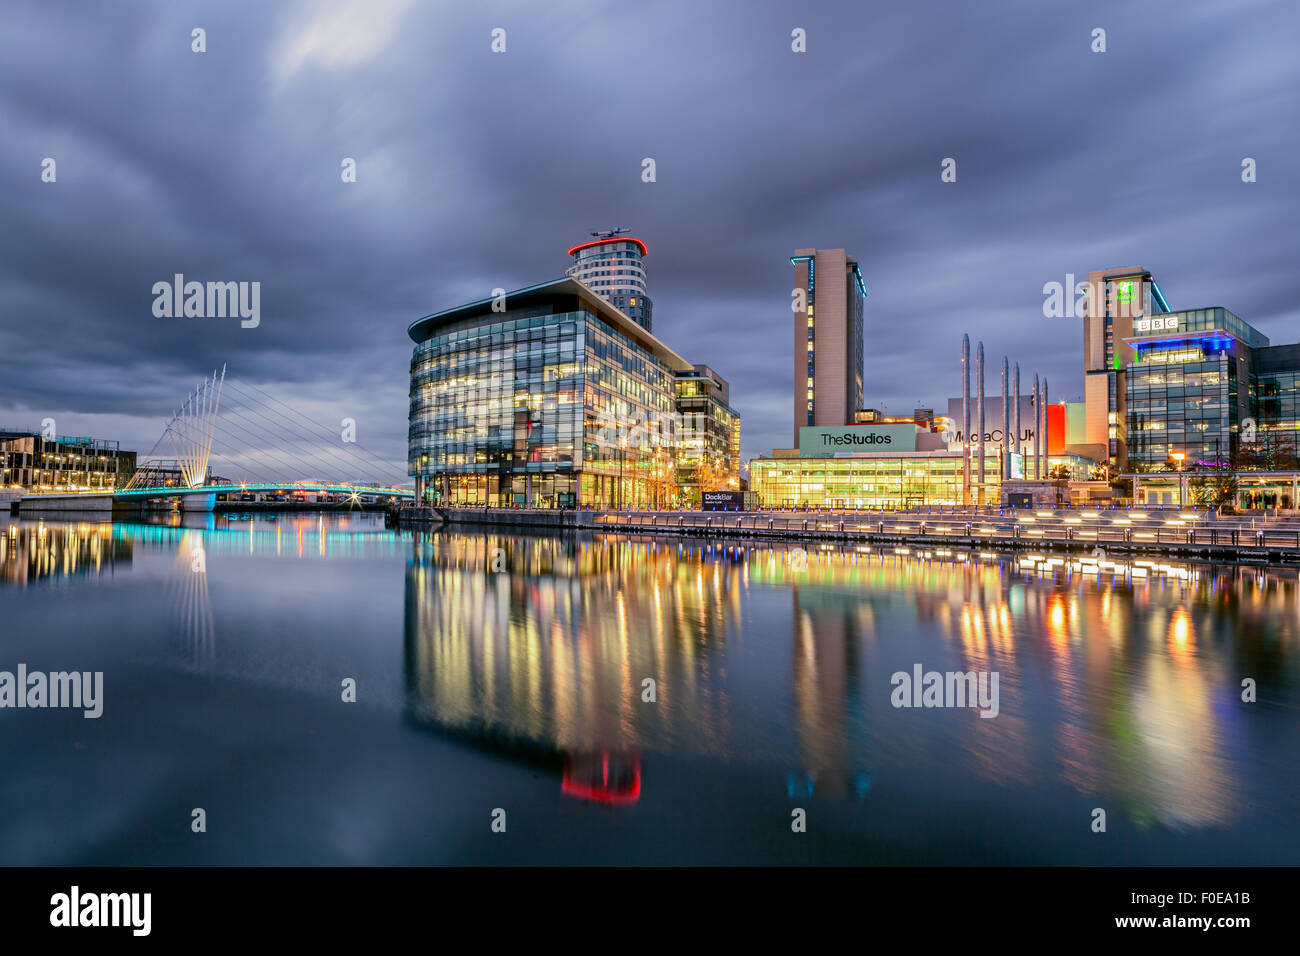 BBC media city at Salford quays , Manchester England. Panoramic view of modern buidings at twilight. Stock Photo